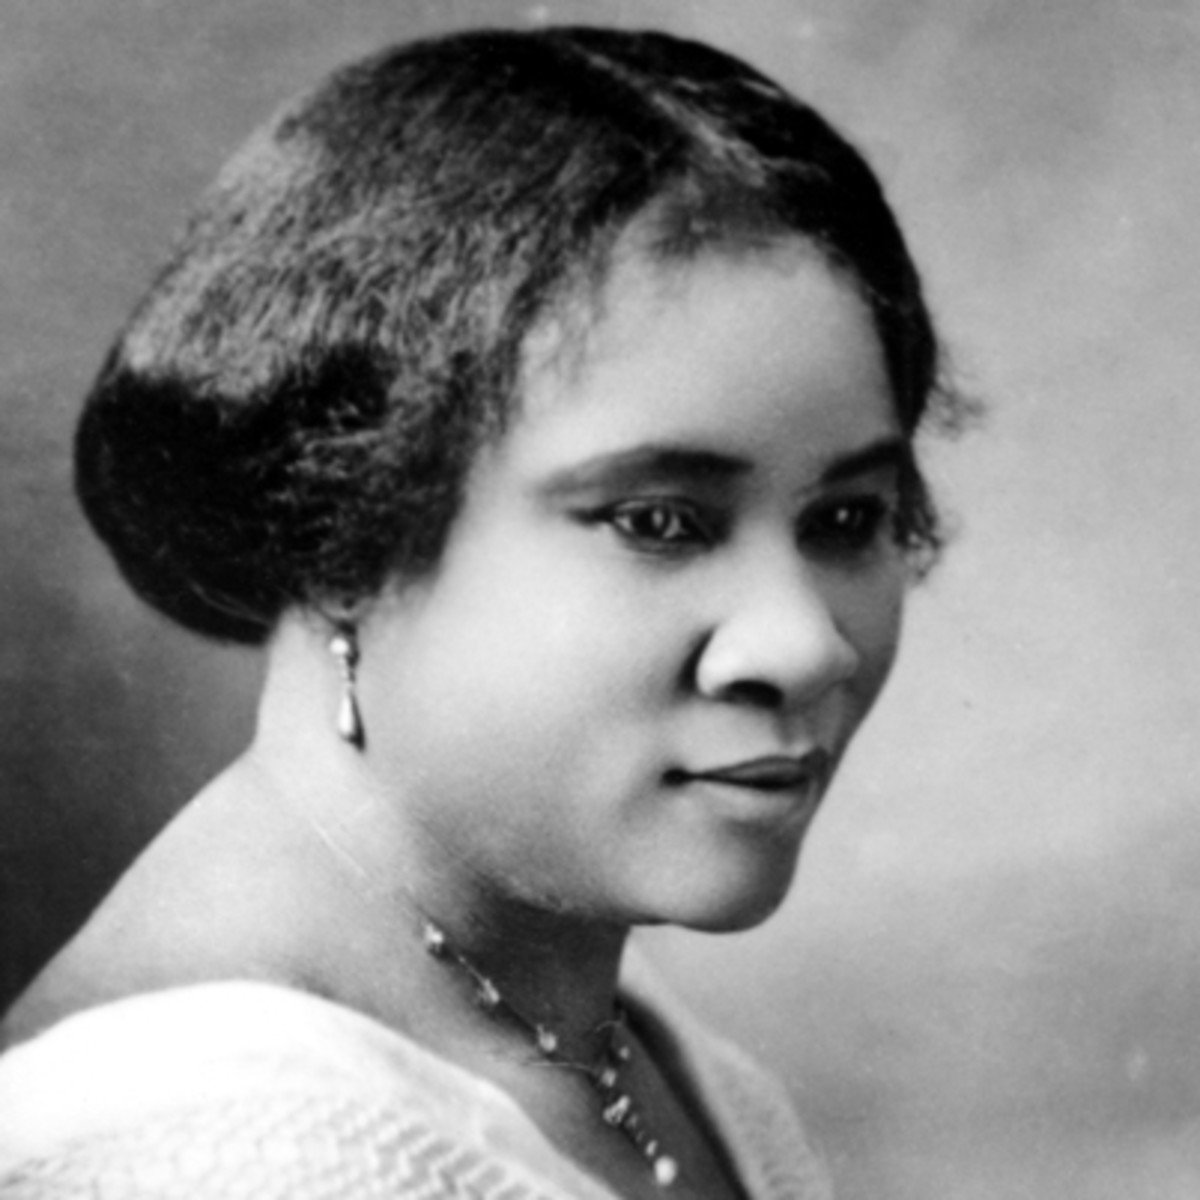 (No black hair thread would be complete without mentioning Madam CJ Walker, the first self-made woman millionaire in America... who made her fortune selling hair-straightening solutions. Black hair care continues to be a lucrative business.)